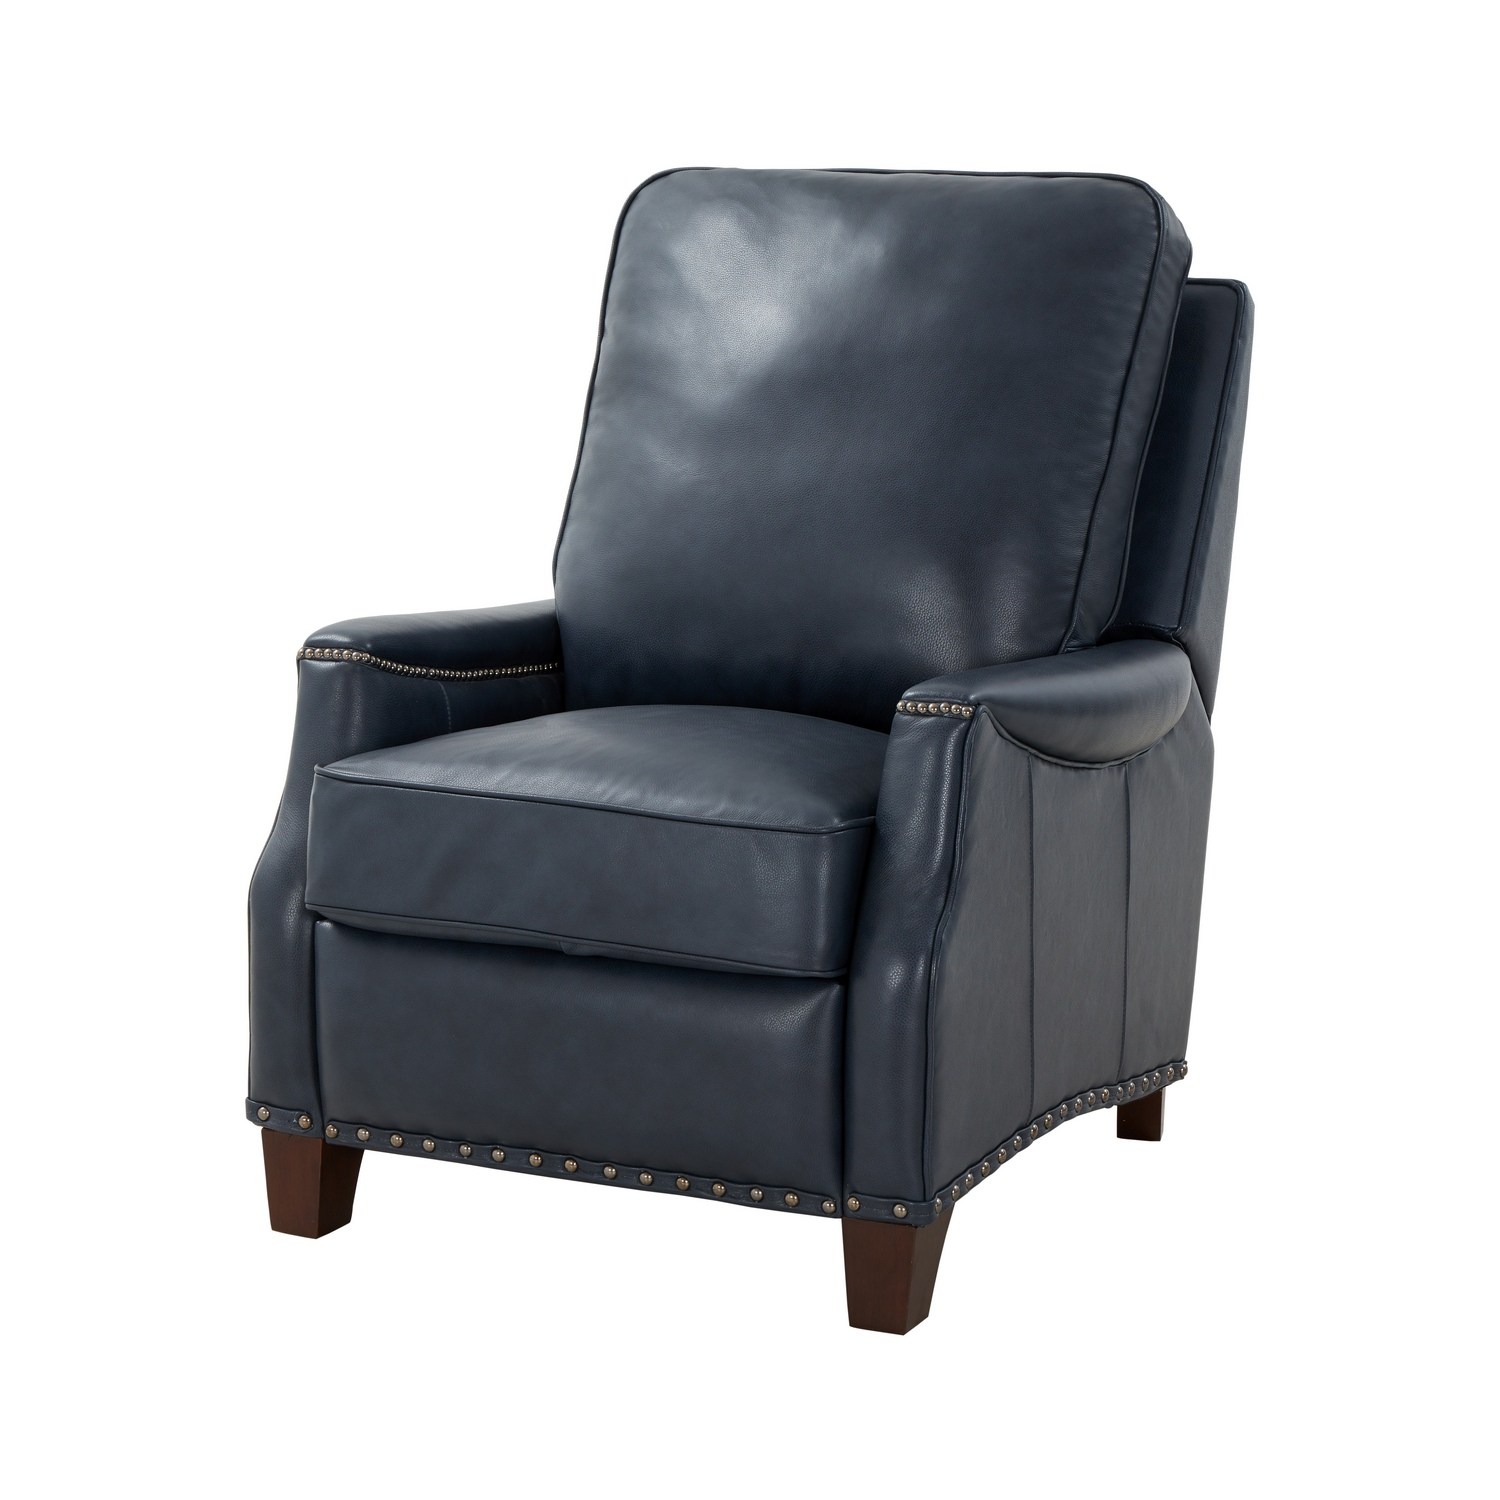 Barcalounger Ellis Power Recliner Chair - Barone Navy Blue/All Leather